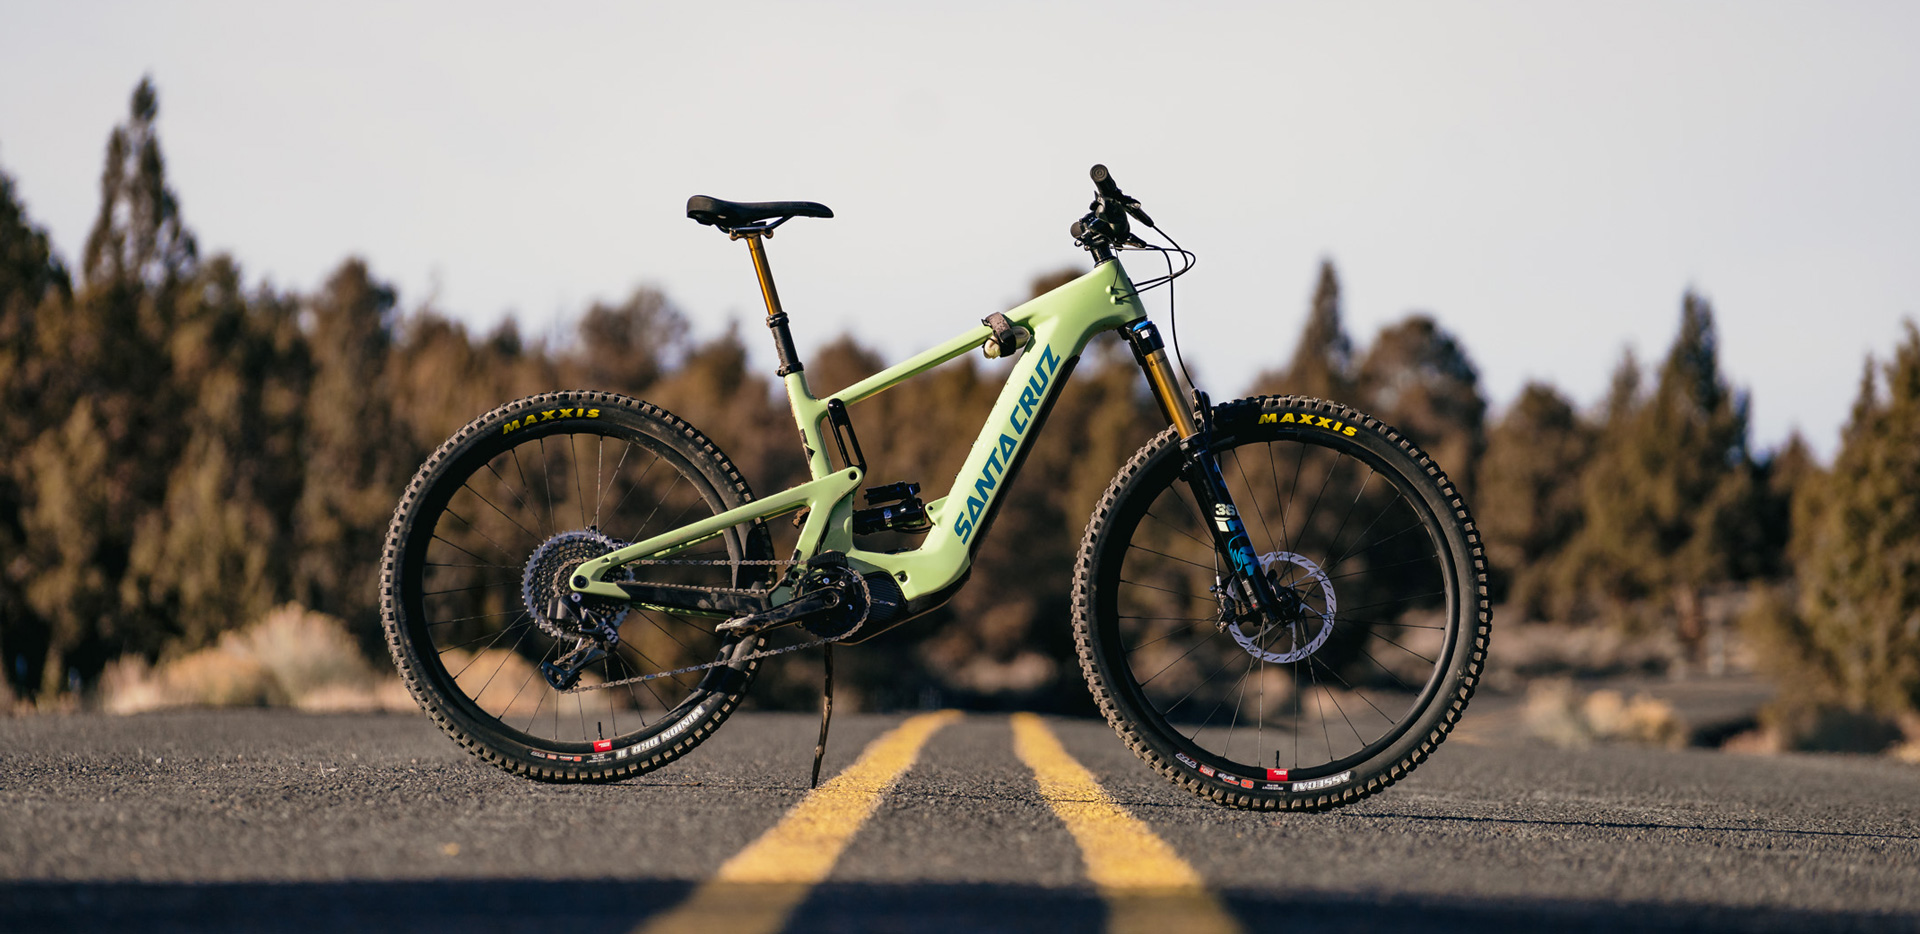 Dissected: The New Santa Cruz Heckler 29 and MX